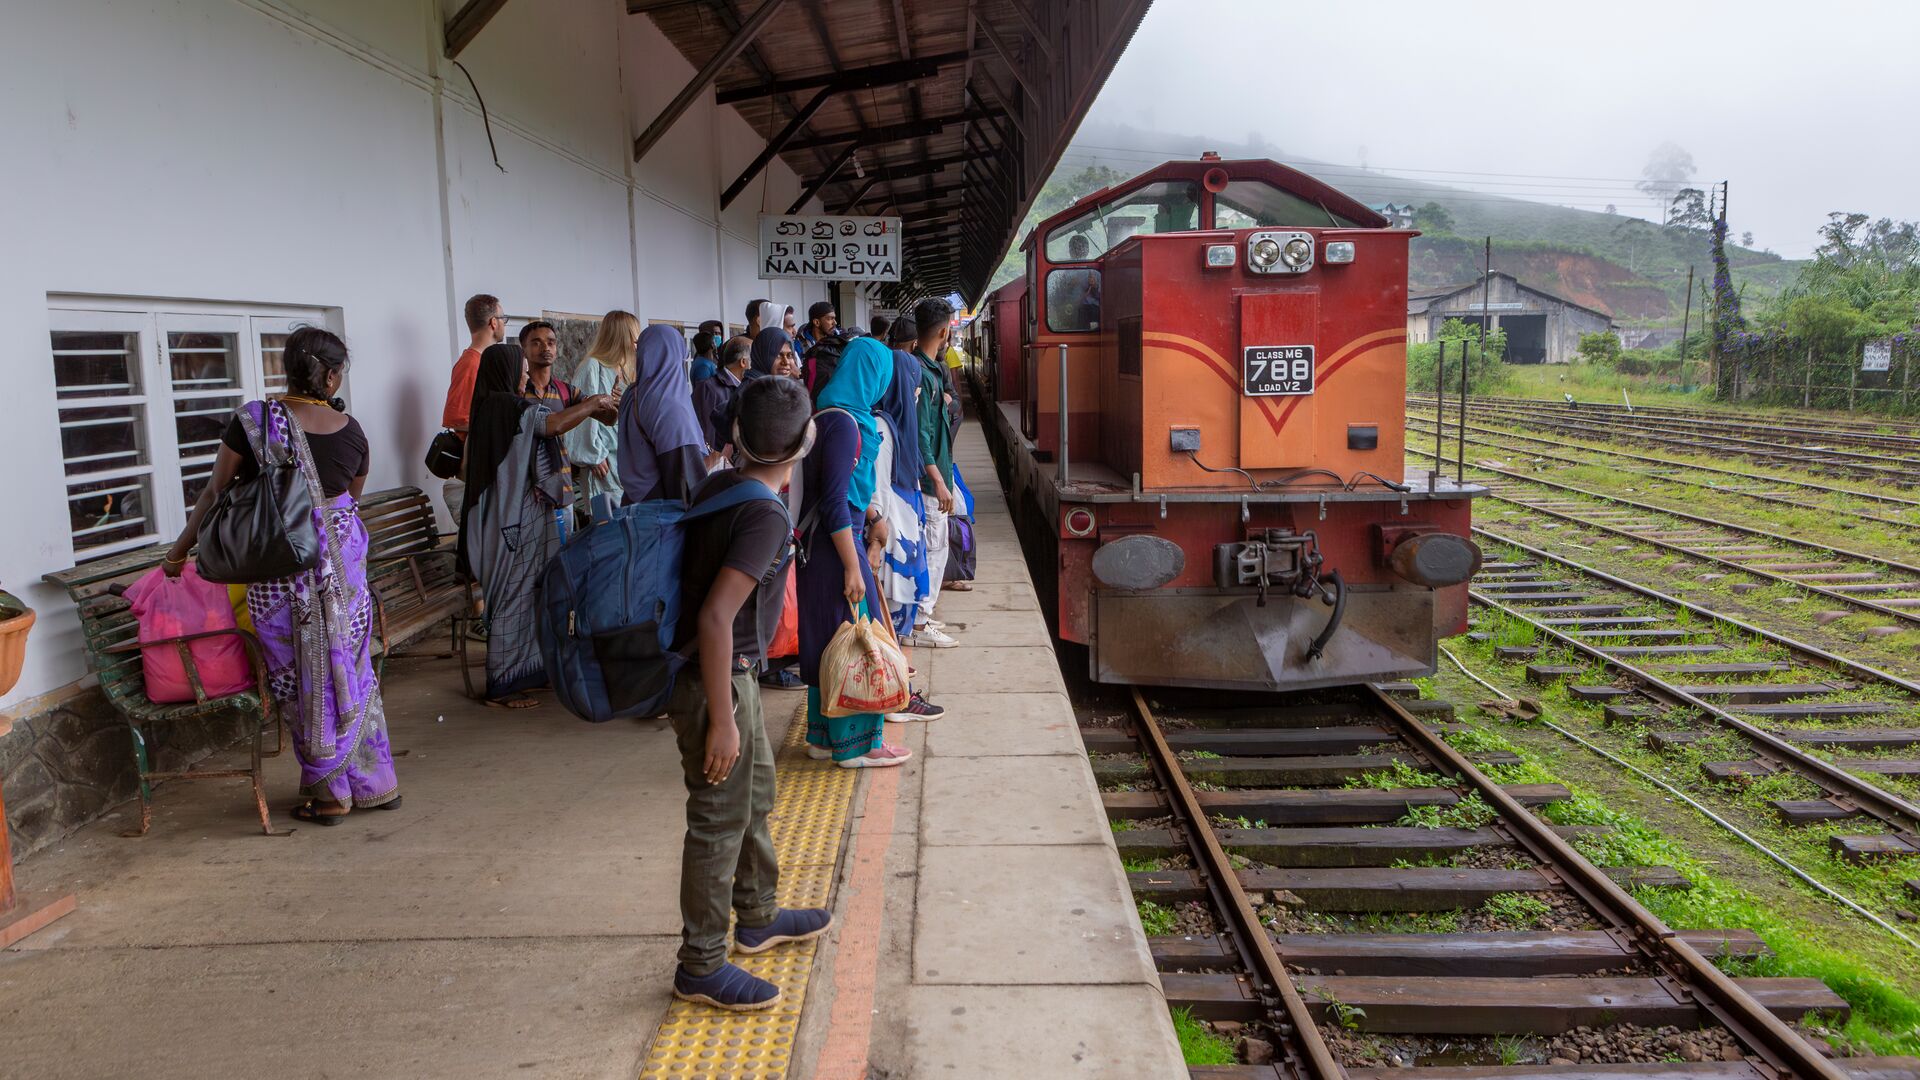 A crowd of passengers waiting to board a train in Sri Lanka